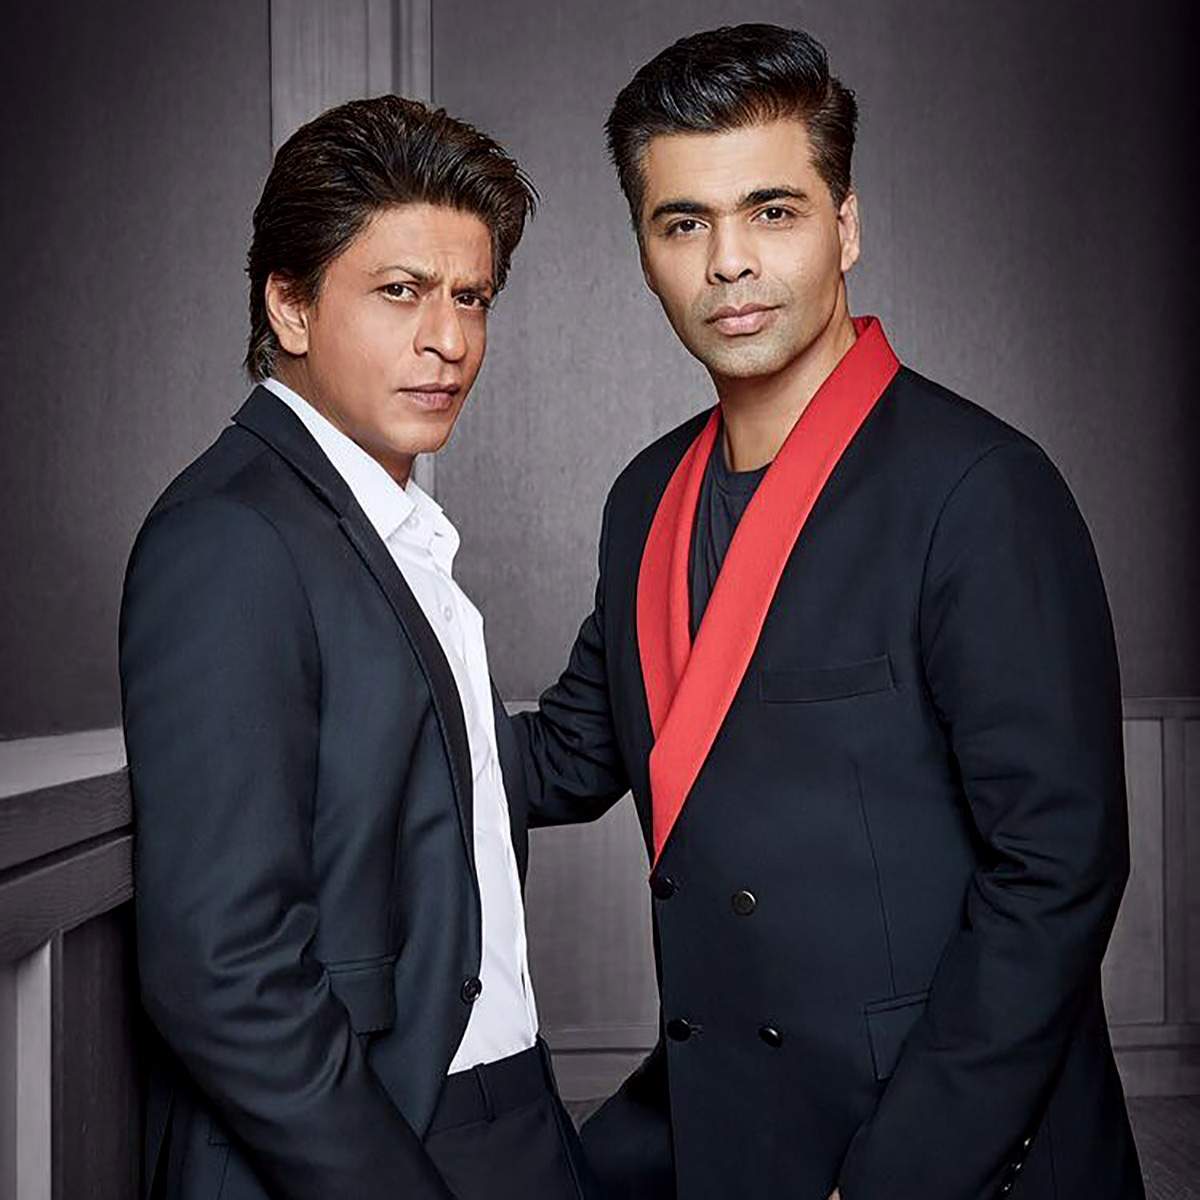 Will SRK Feature On Koffee with Karan?